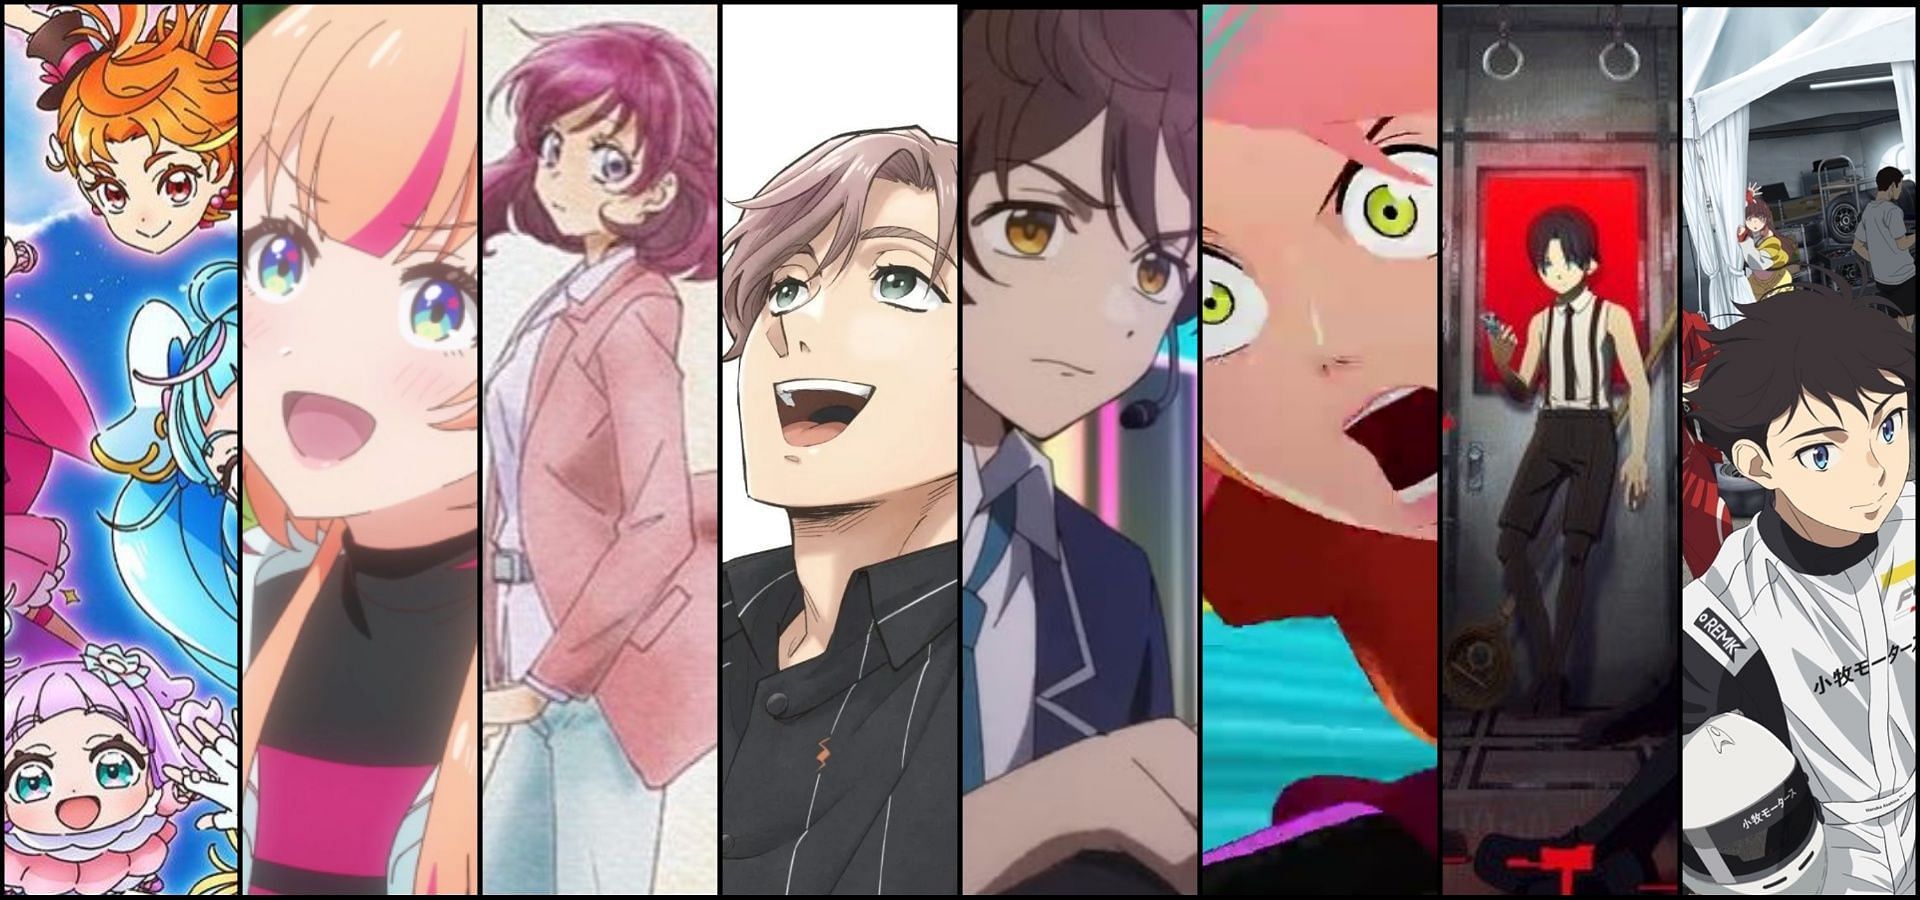 21 Short Anime Series to Binge in One Day